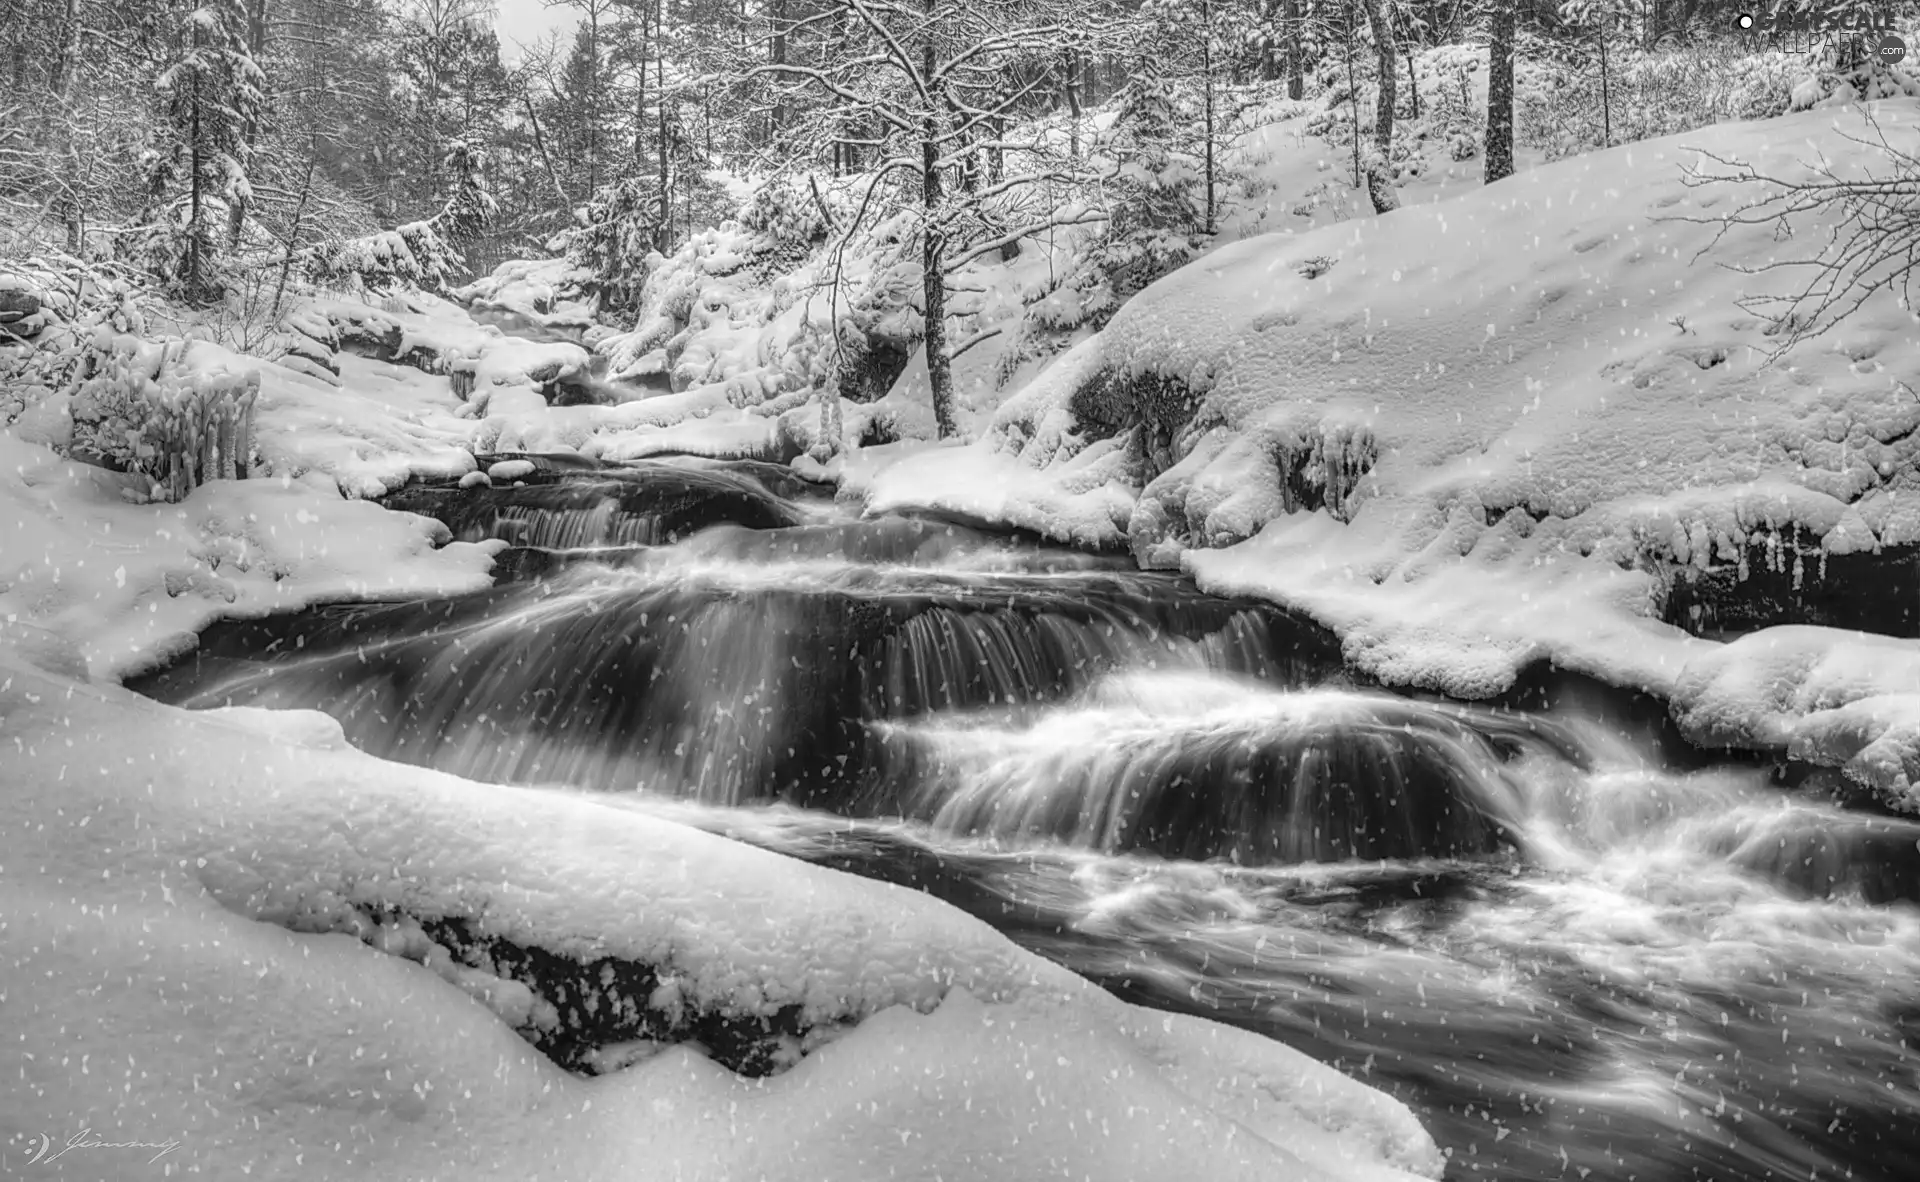 Cascades, forest, snow, winter, water, River